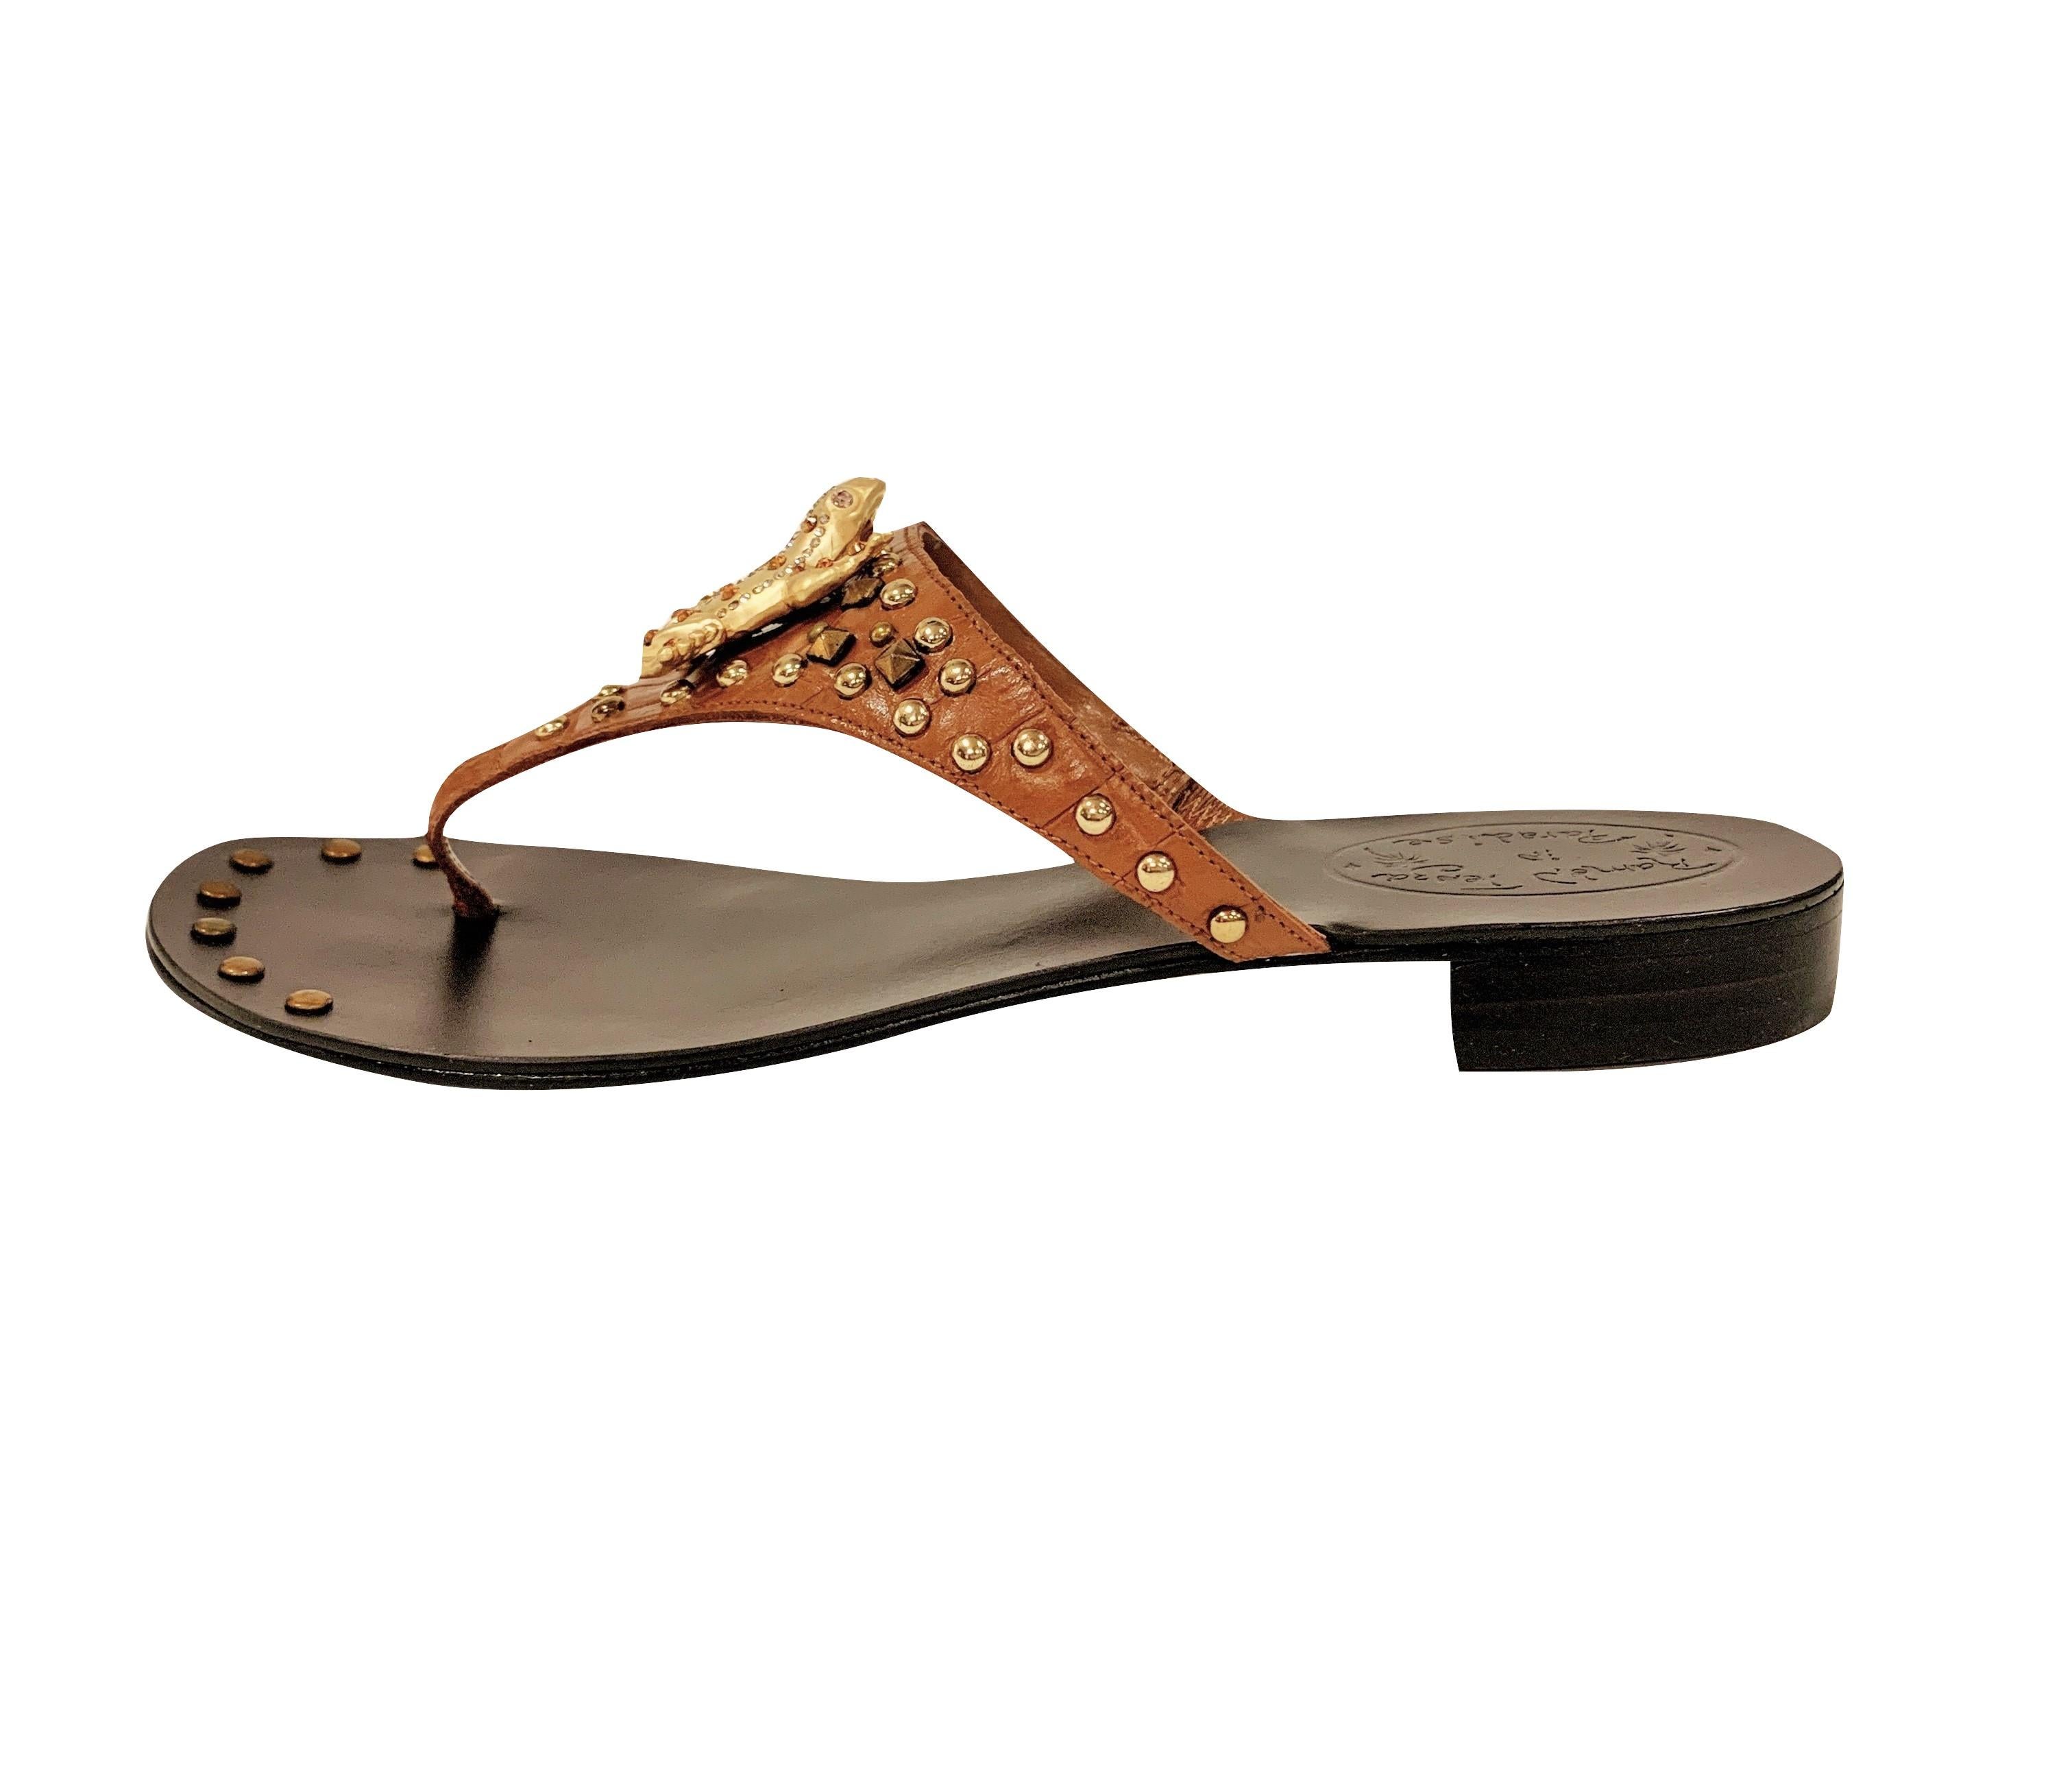 Ramon Tenza Spain
Brand New
Cognac & Gold Thong Sandals
* Gold Frog Adornment
* Cognac Leather
* Gold Beading
* Size: 8
* 1.25